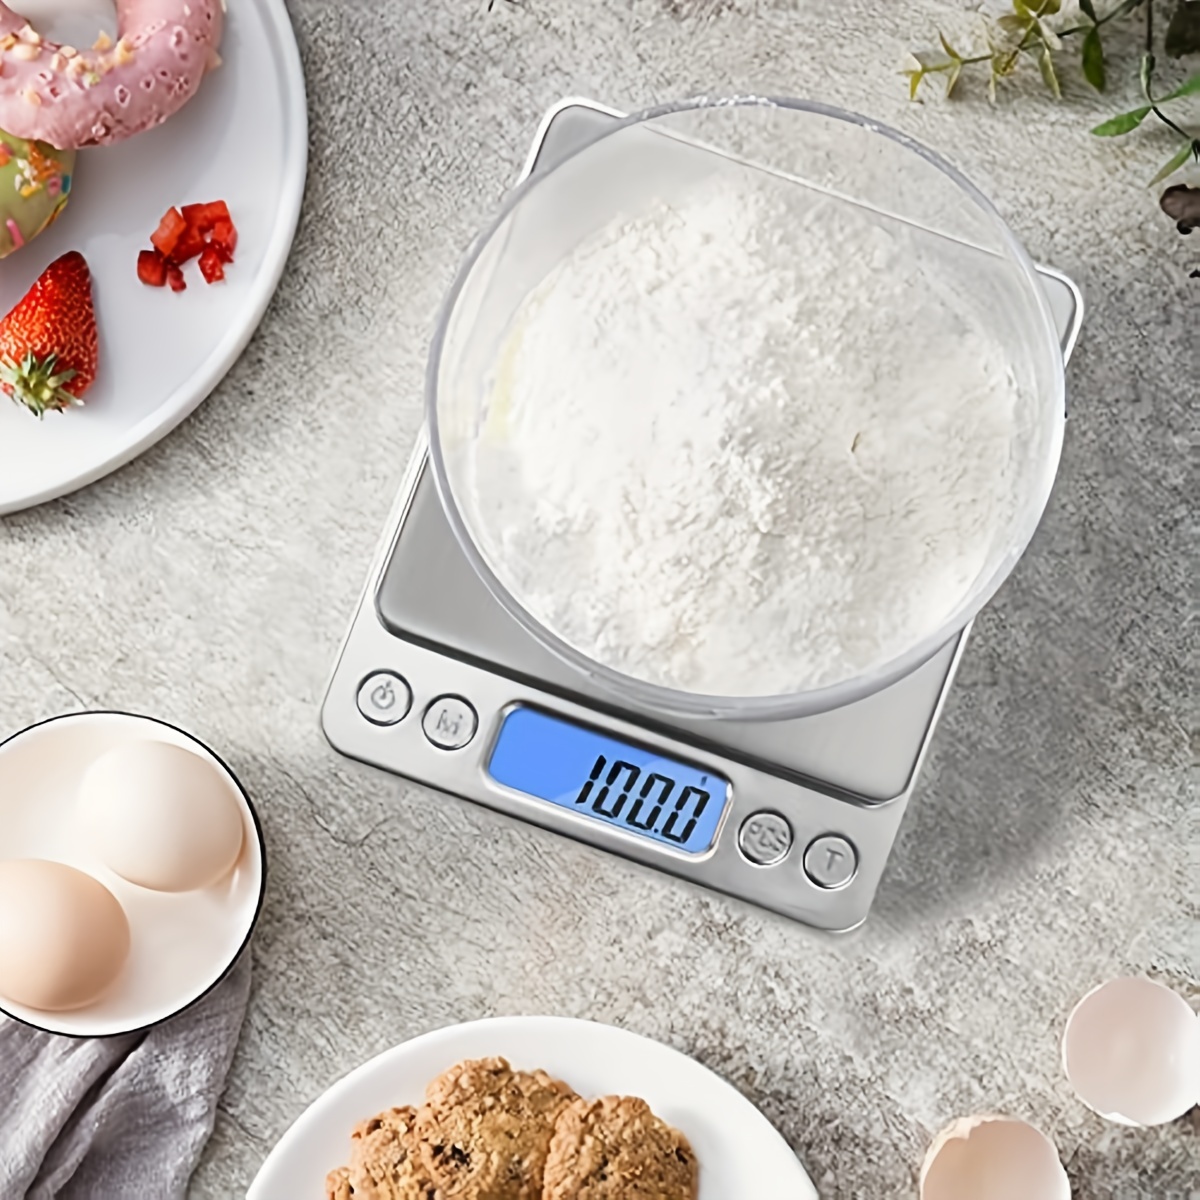 Digital Gram Scale 0.01g Food Scale High Precision Kitchen Scale Multifunctional Stainless Steel Pocket Scale - 100g/0.01g